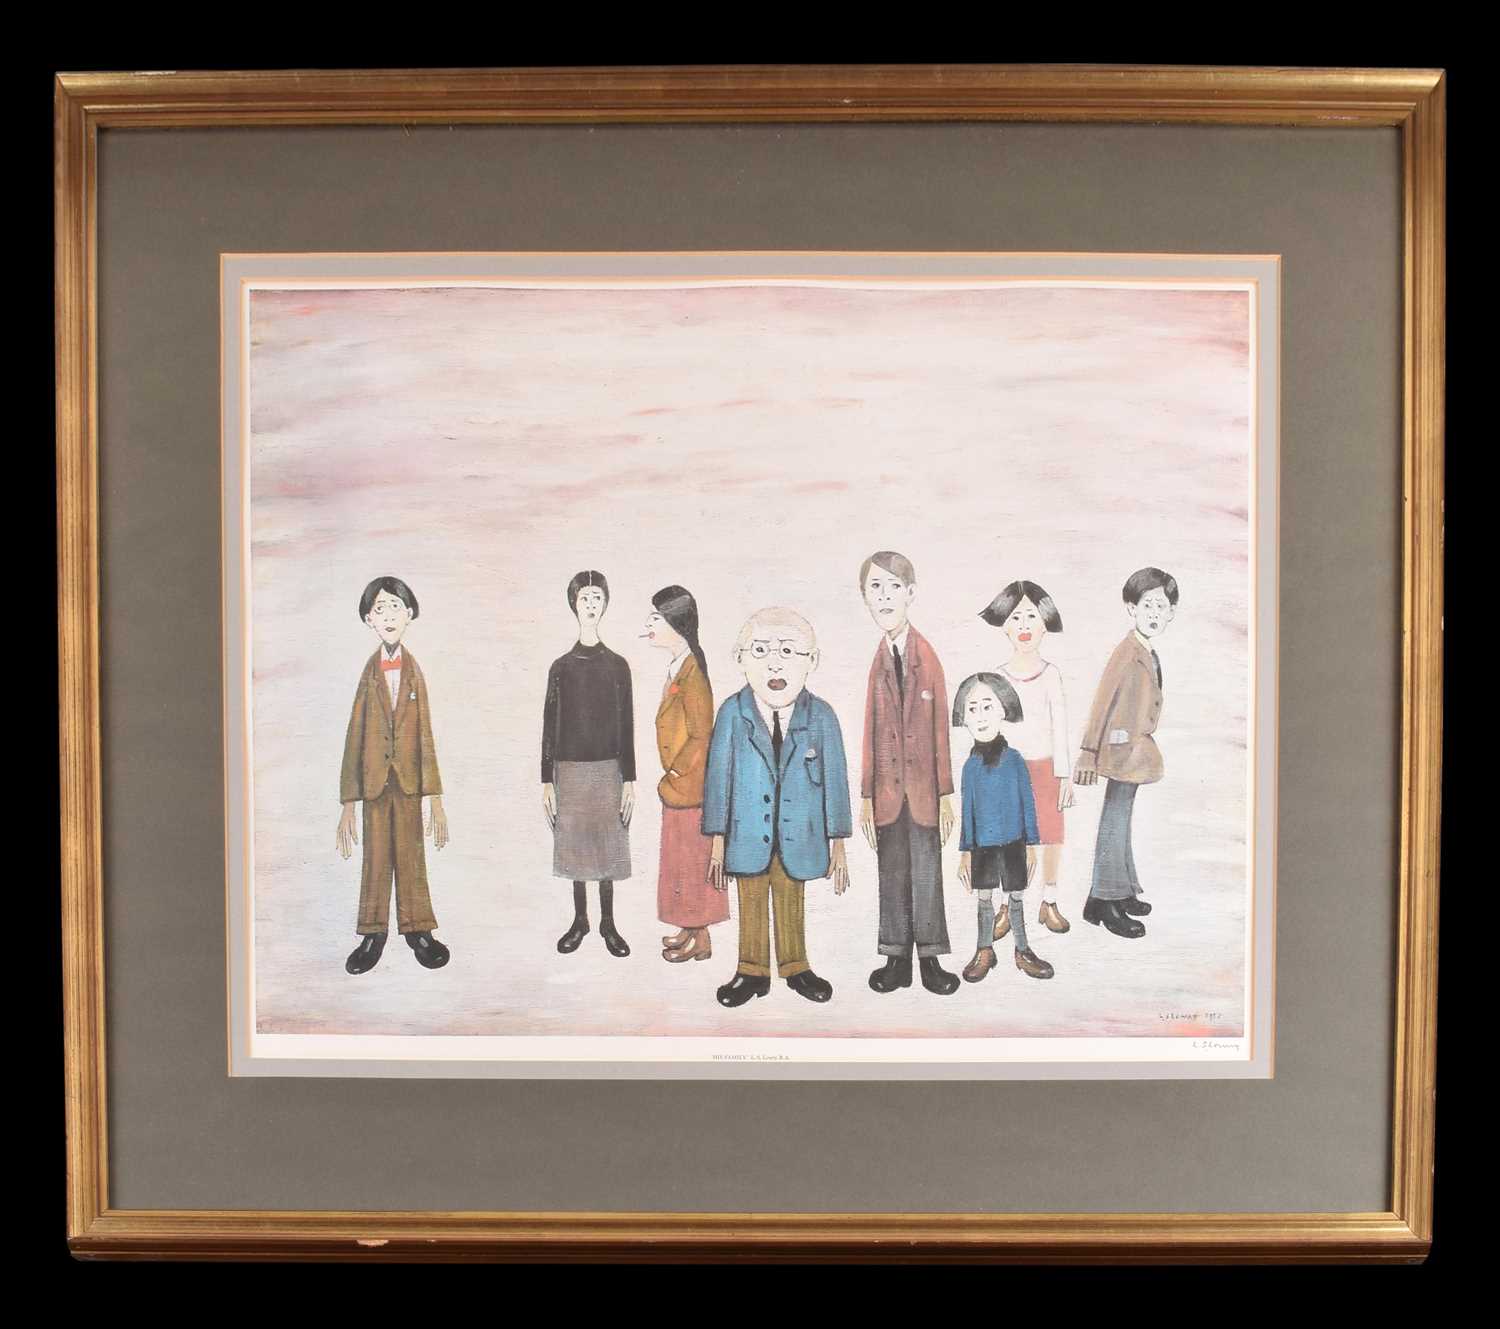 L.S. Lowry R.A. (British 1887-1976) "His Family" - Image 2 of 2